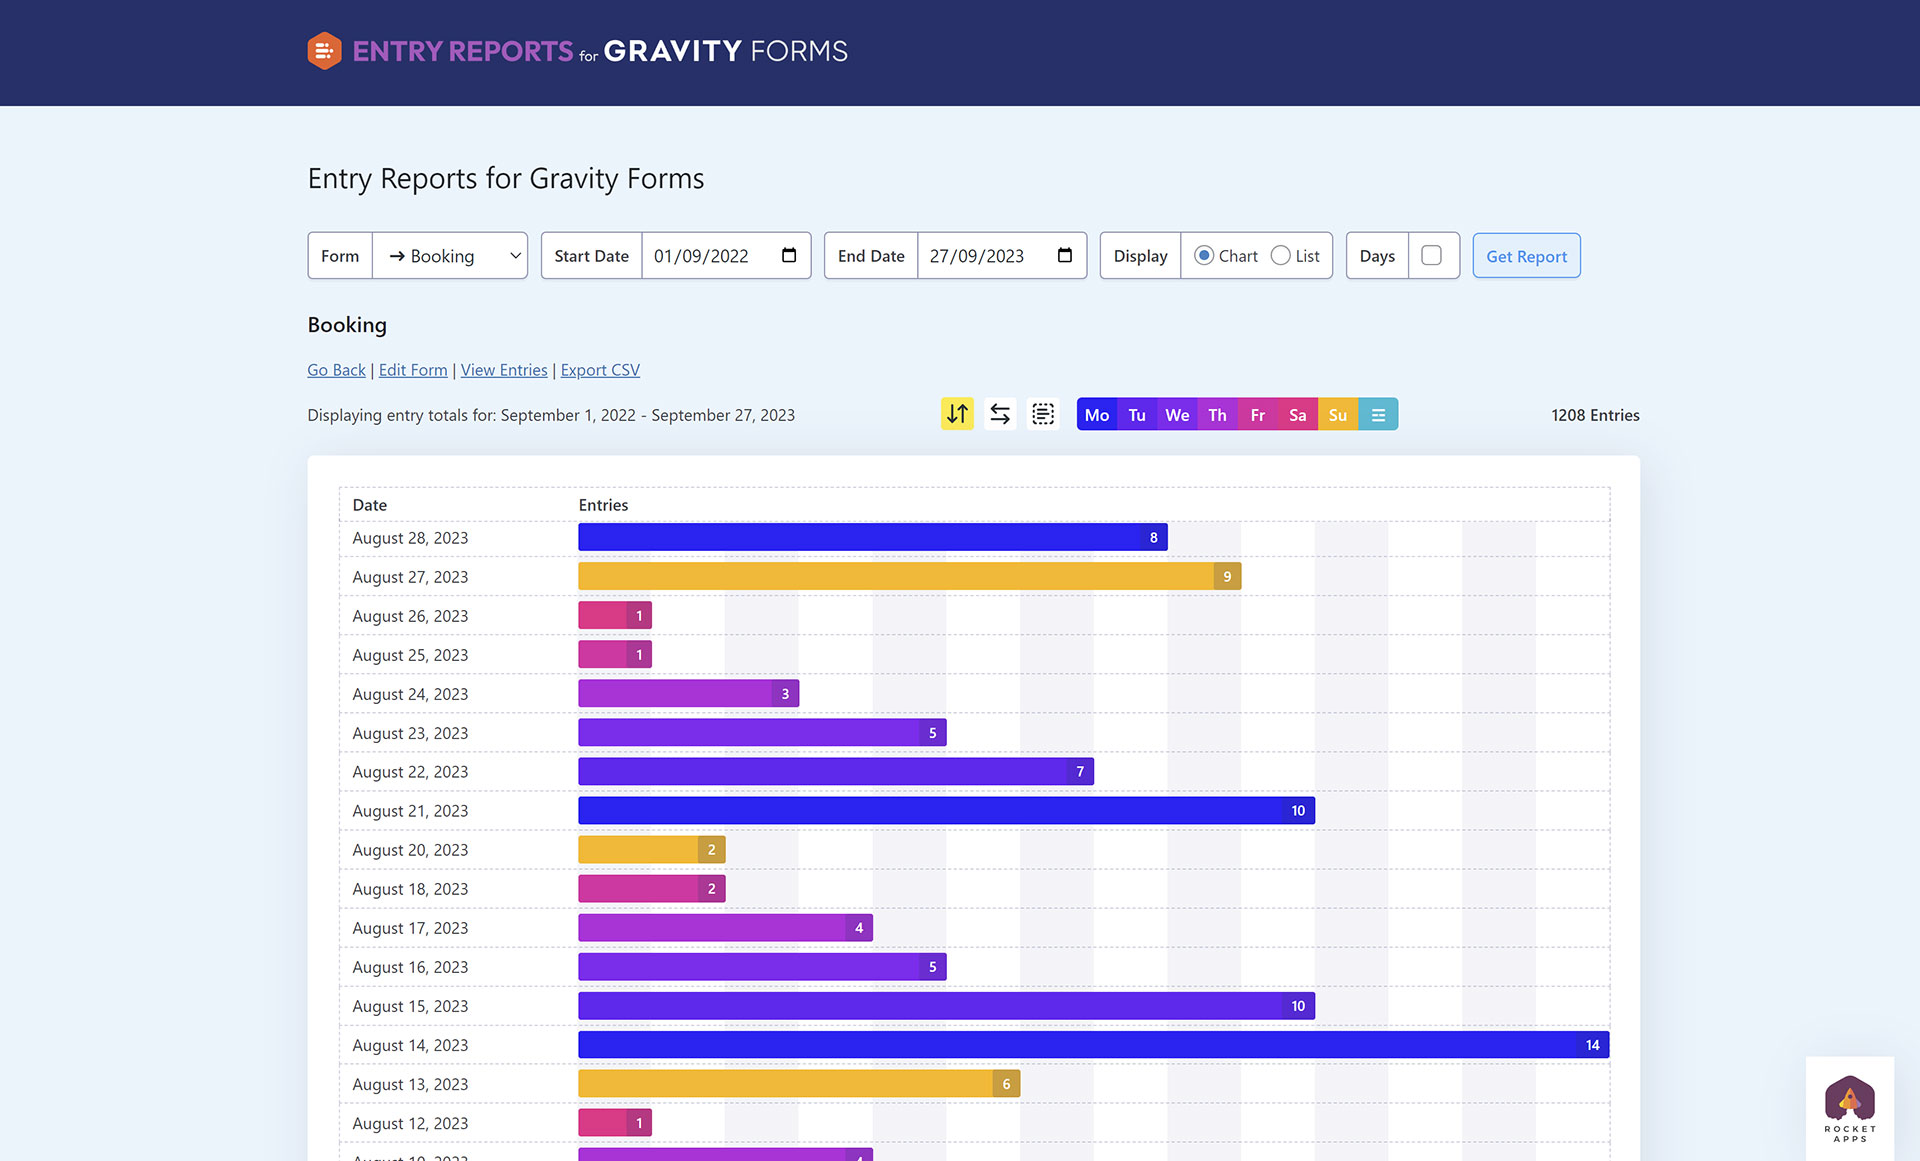 Rocket Apps Blog: Just launched: Entry Reports Pro for Gravity Forms